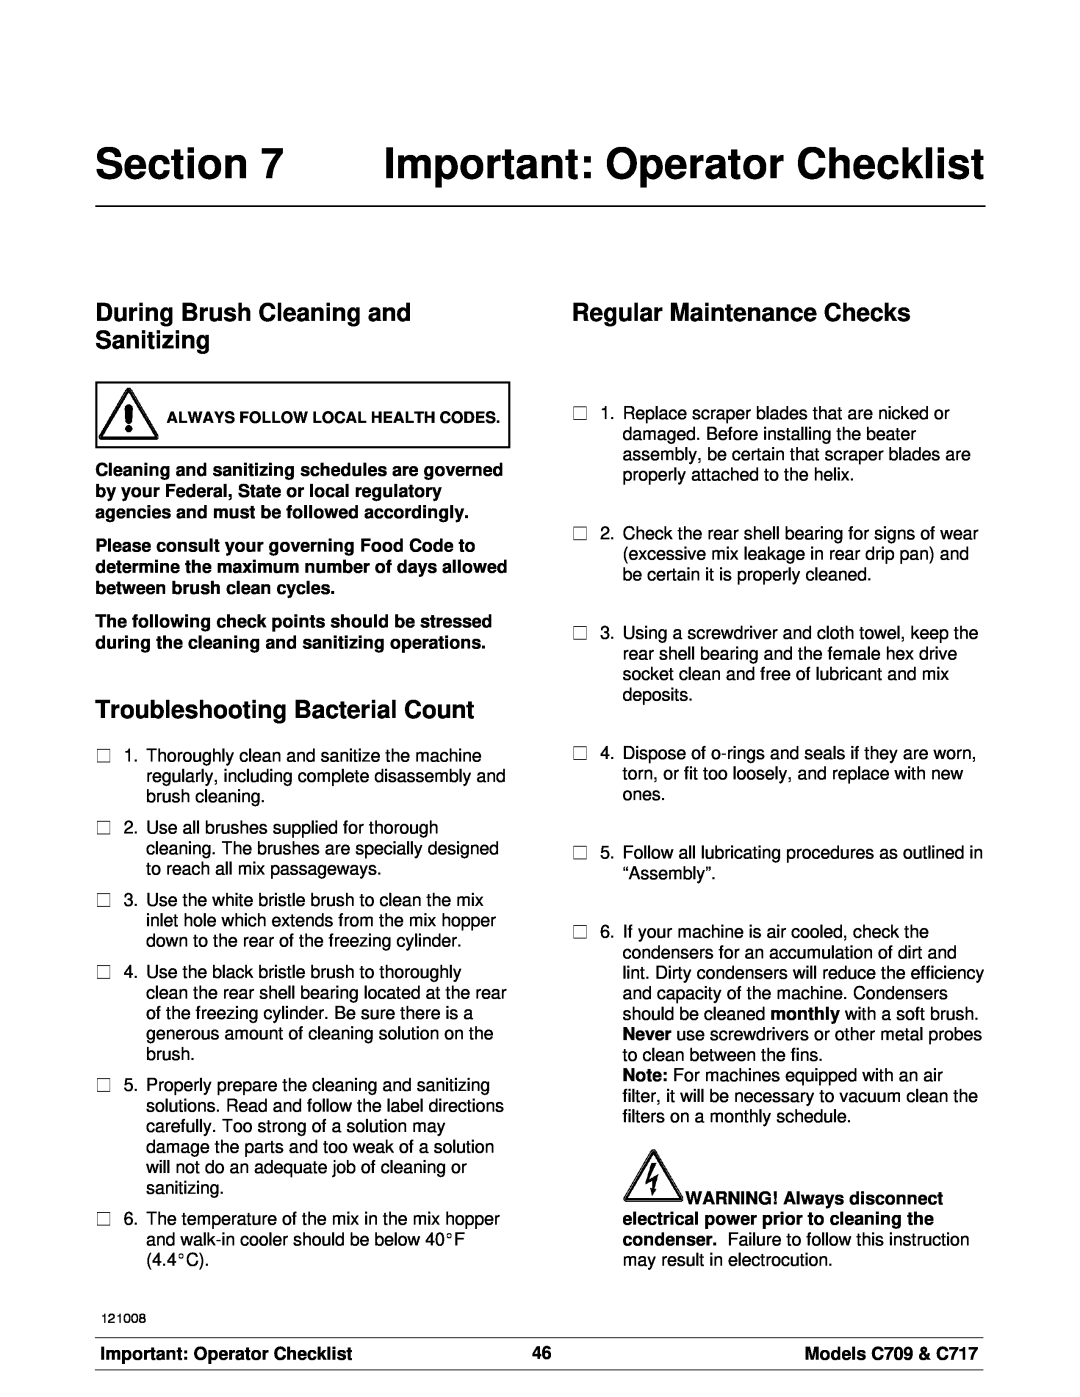 Taylor C709, C717 manual Important Operator Checklist, During Brush Cleaning and Sanitizing, Troubleshooting Bacterial Count 